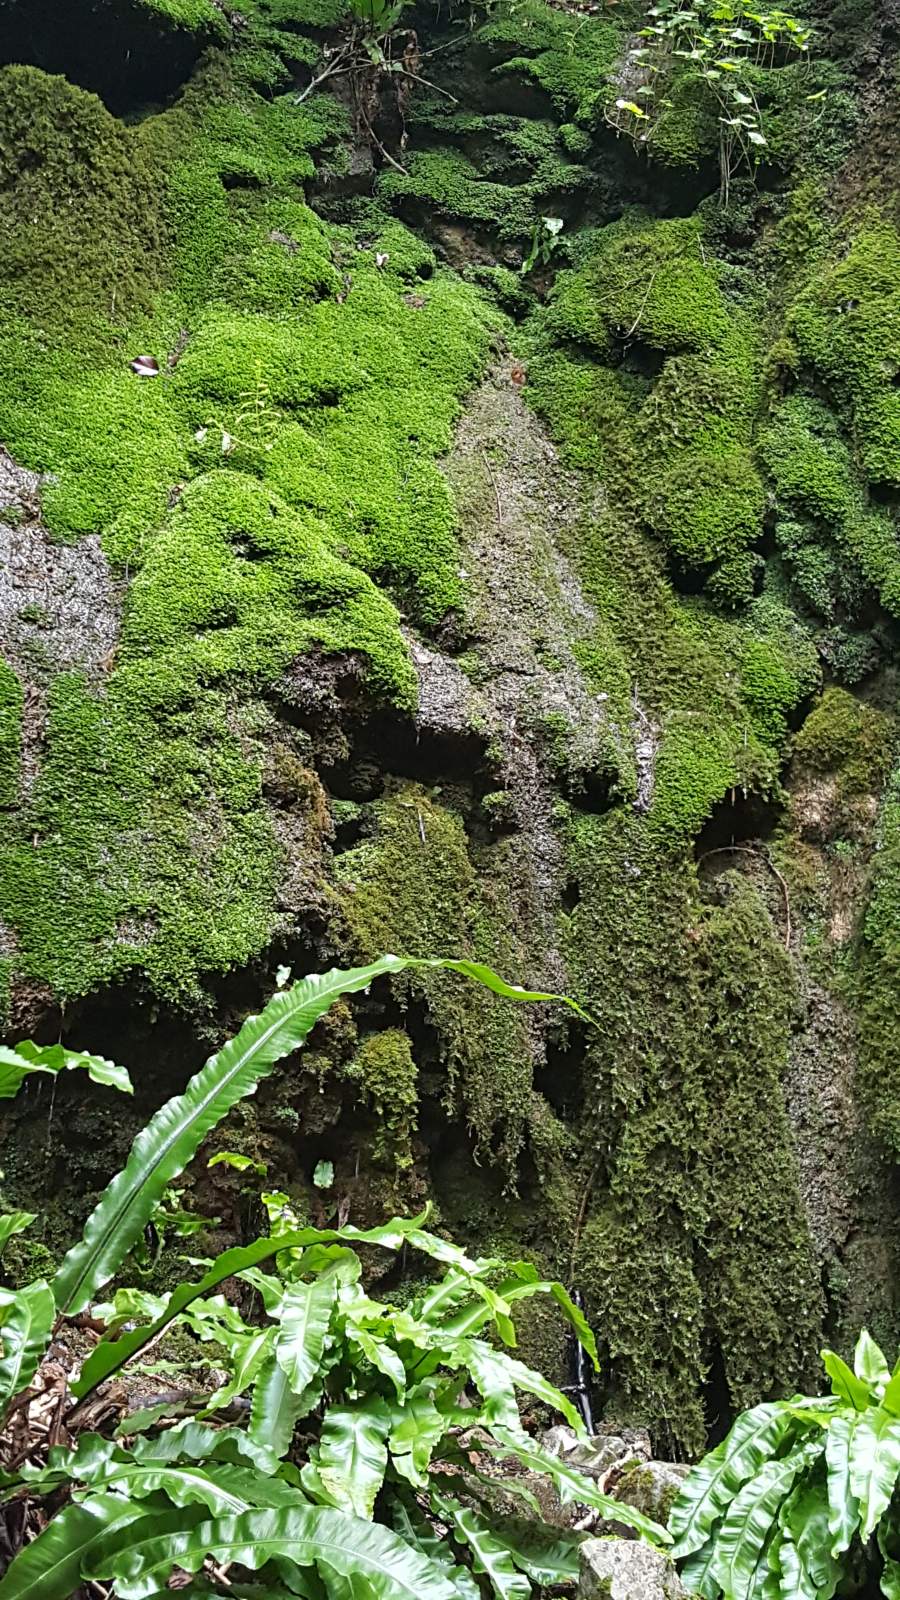 Mosses and ferns dripping with water outside the Northern portal of Shute Shelve Tunnel